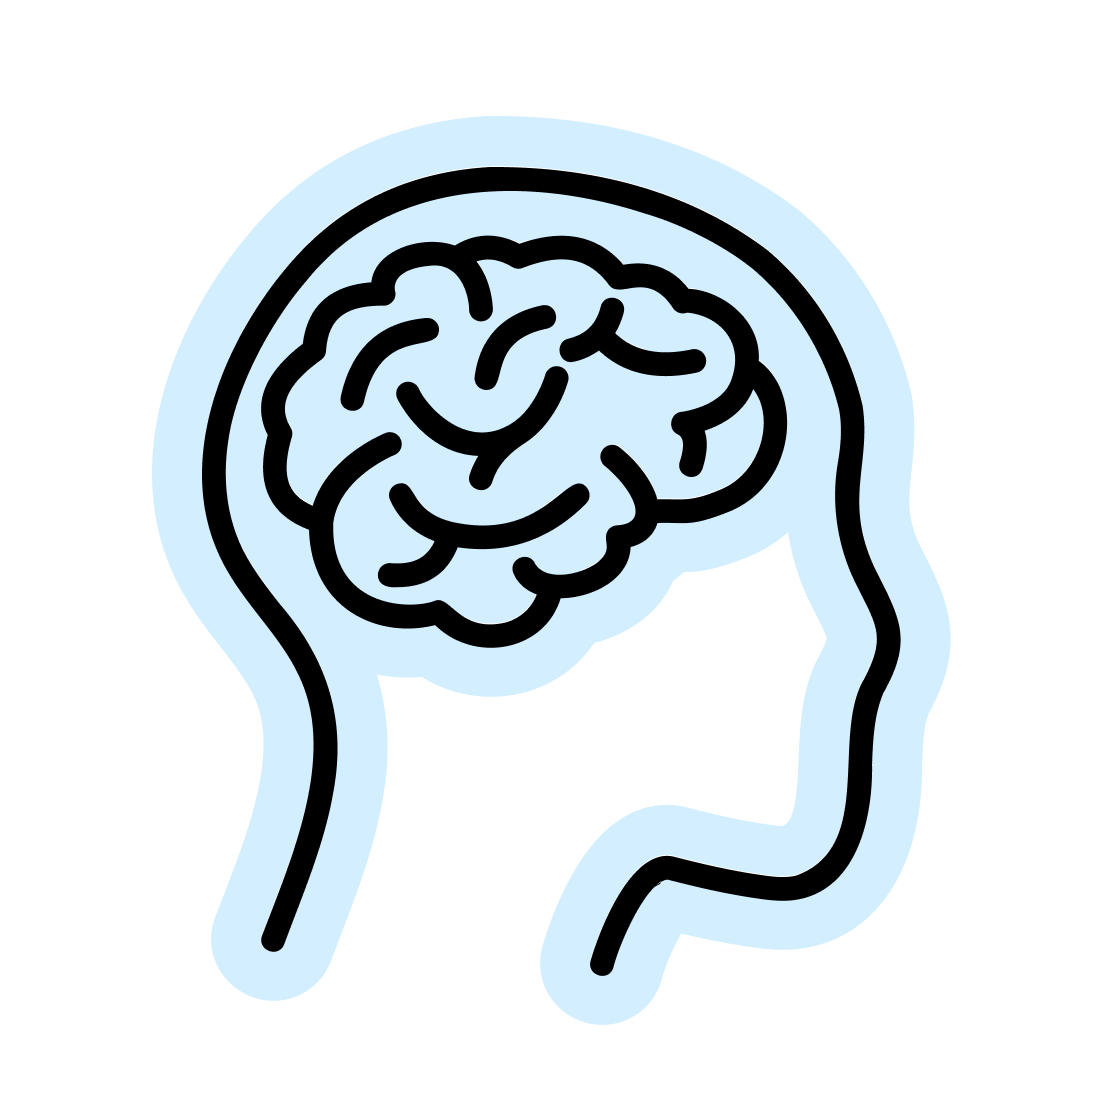 A black icon of a person's face and brain, highlighted in light blue